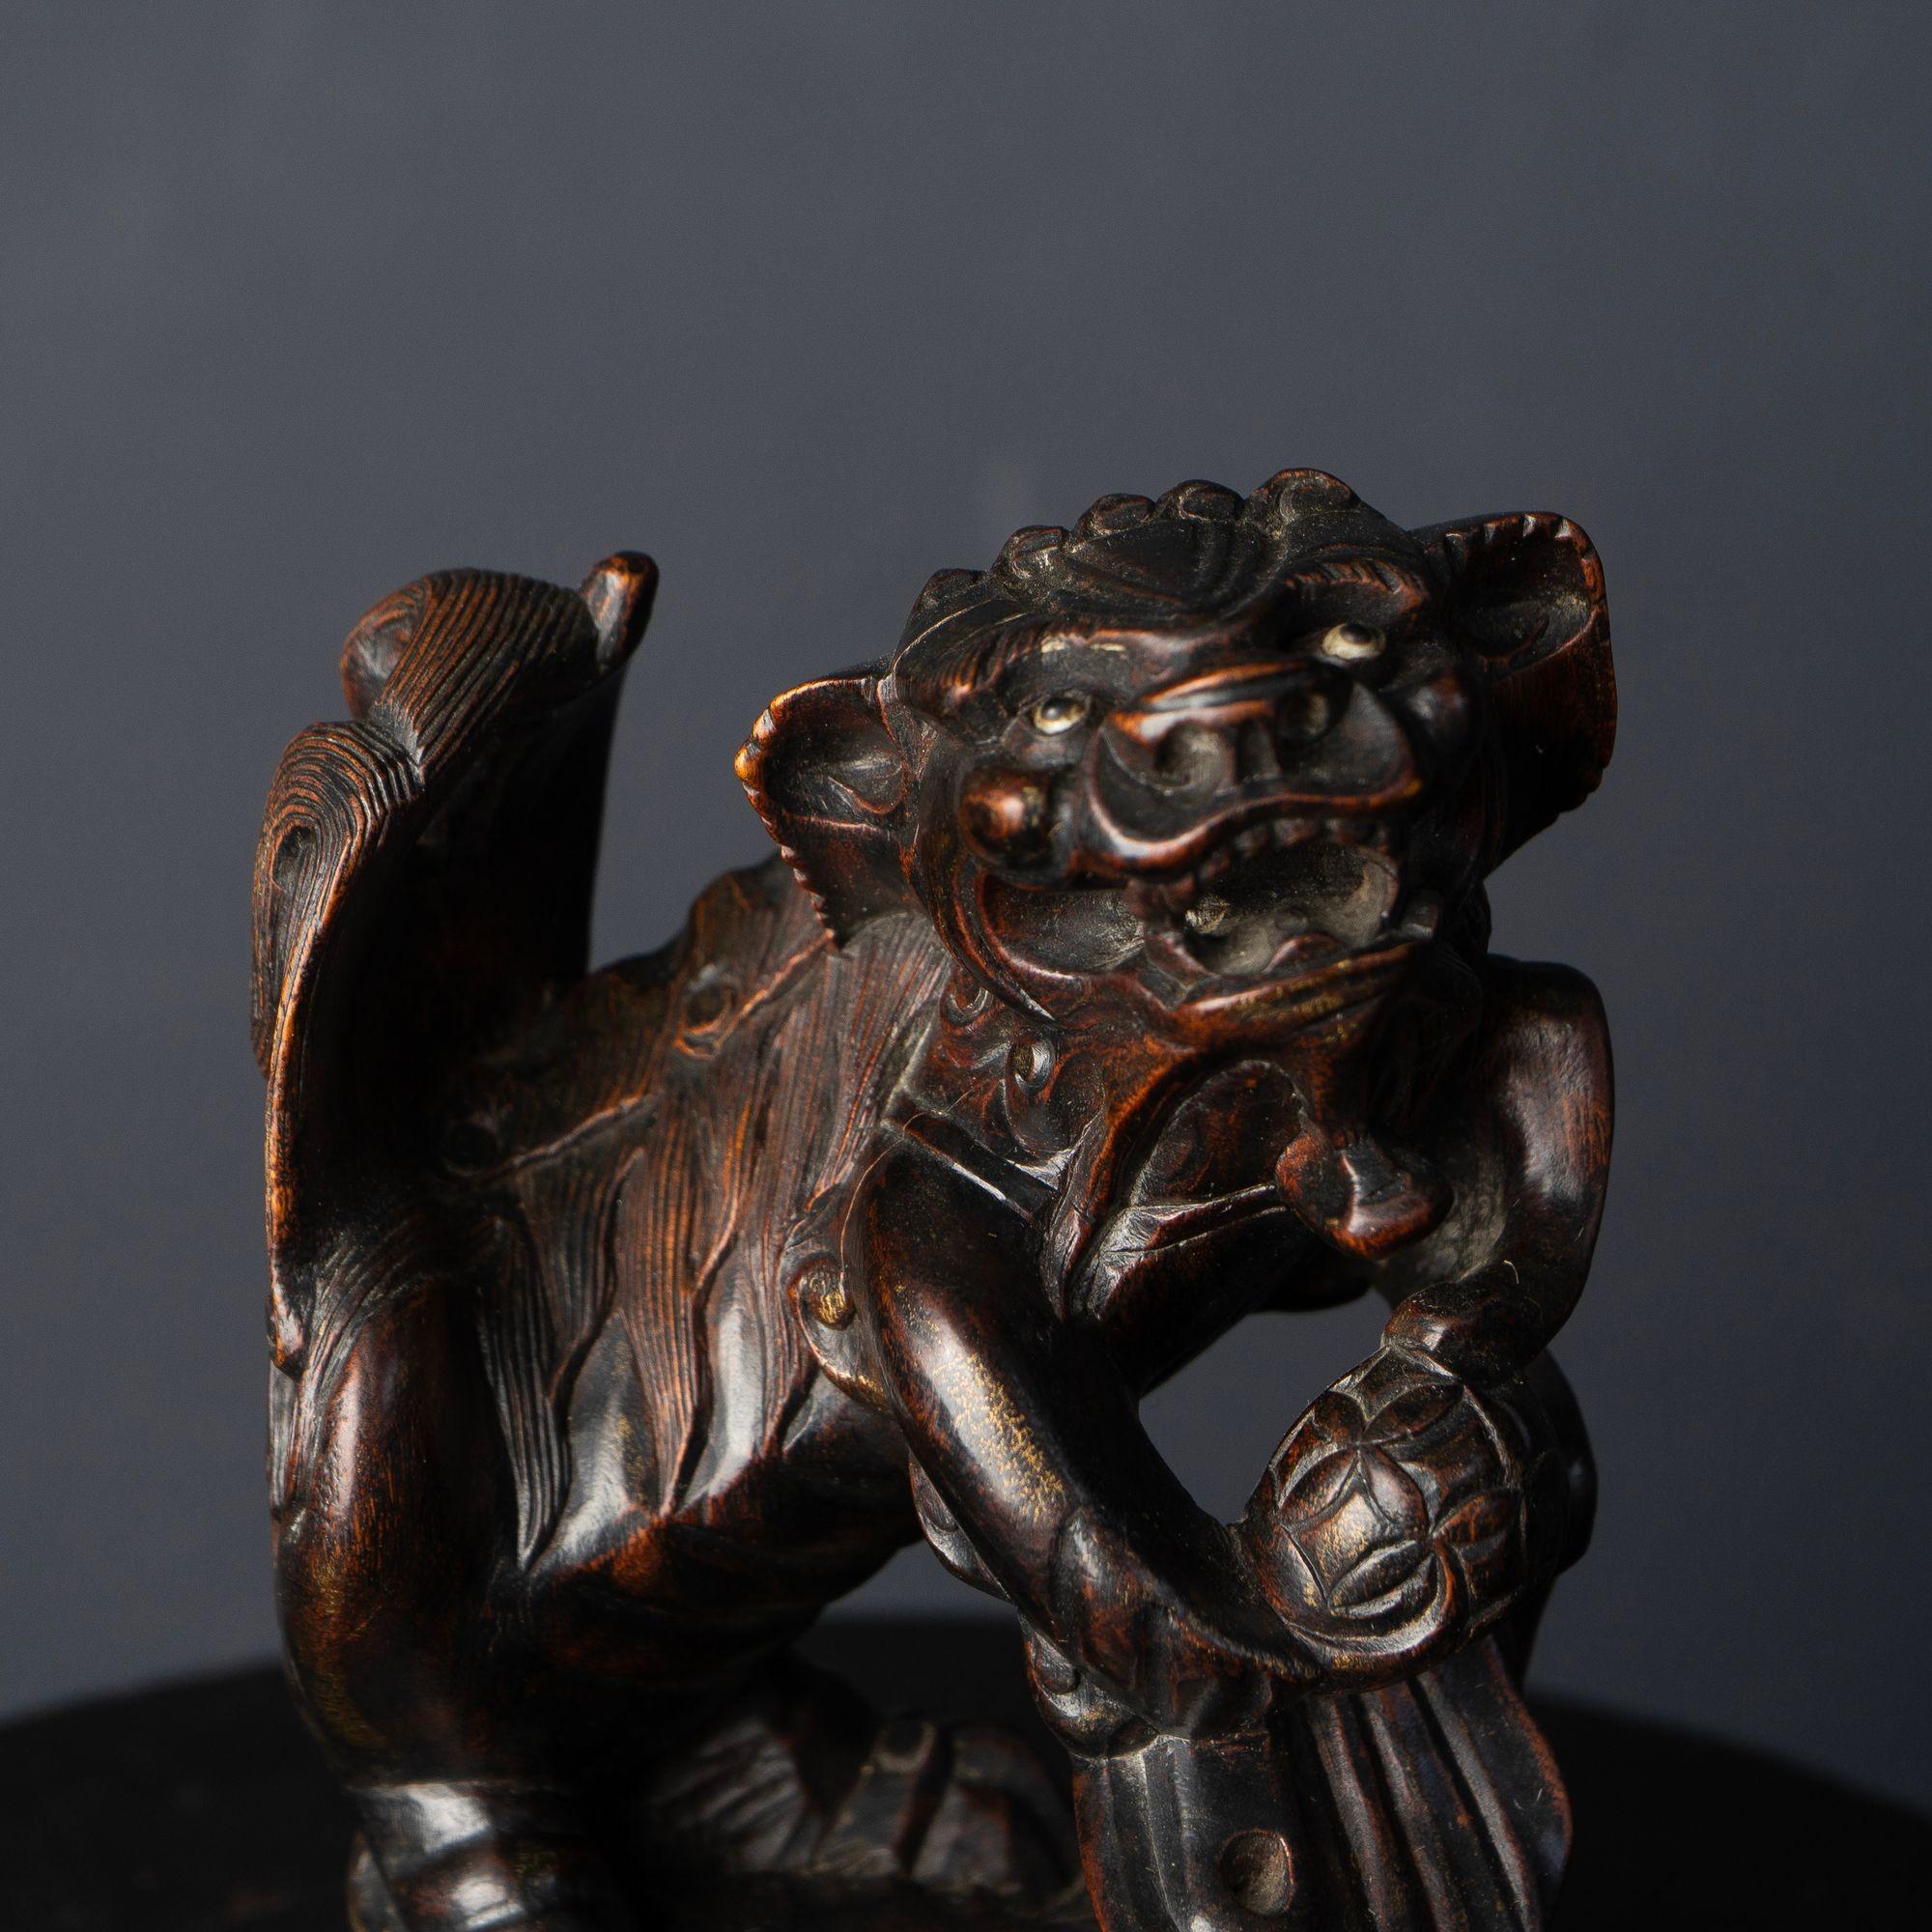 19th Century Pair of Antique Chinese Carved Wooden Foo Dogs or Guardian Lion Statues, Qing